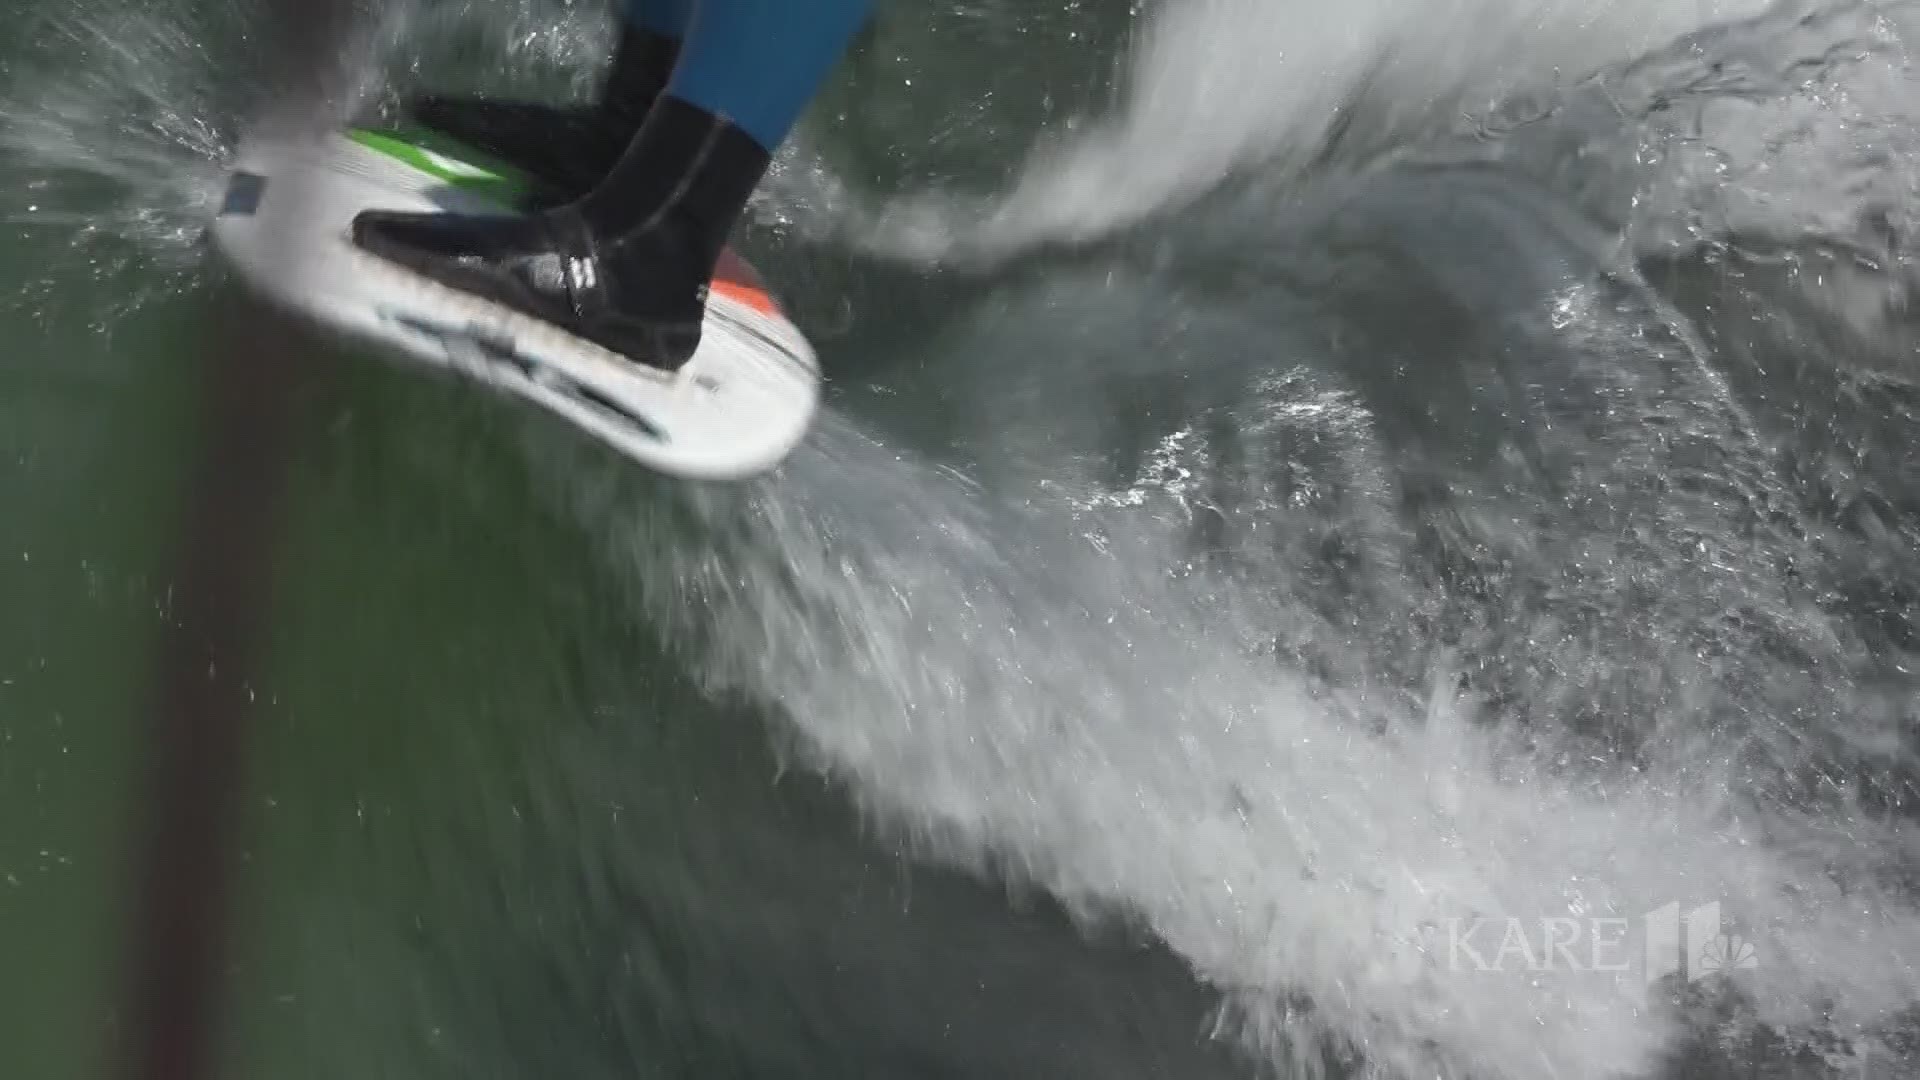 Minnesota wakesurfer Stacia Bank rides the wave into her professional career. https://kare11.tv/2WfrqnD